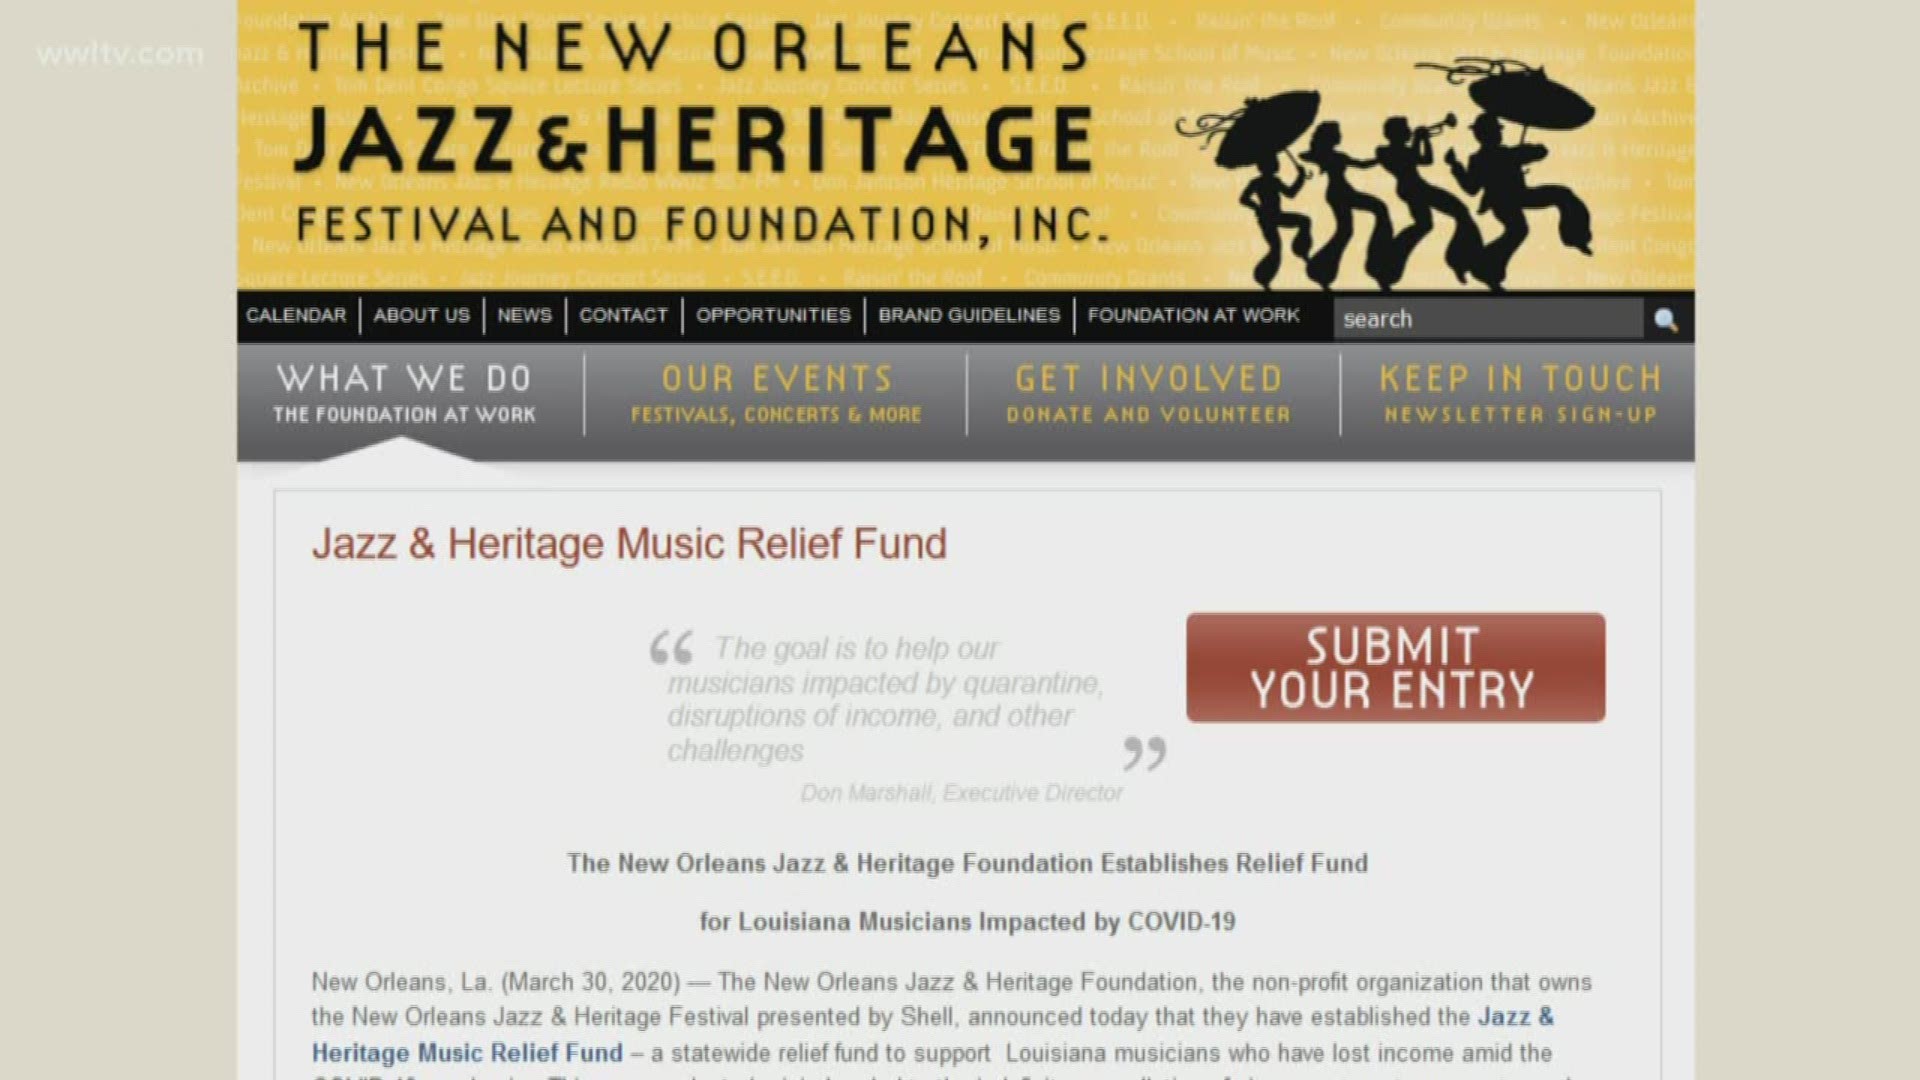 The Jazz and Heritage Festival and Foundation has pledged $250,000 to the relief fund and hopes to add more.